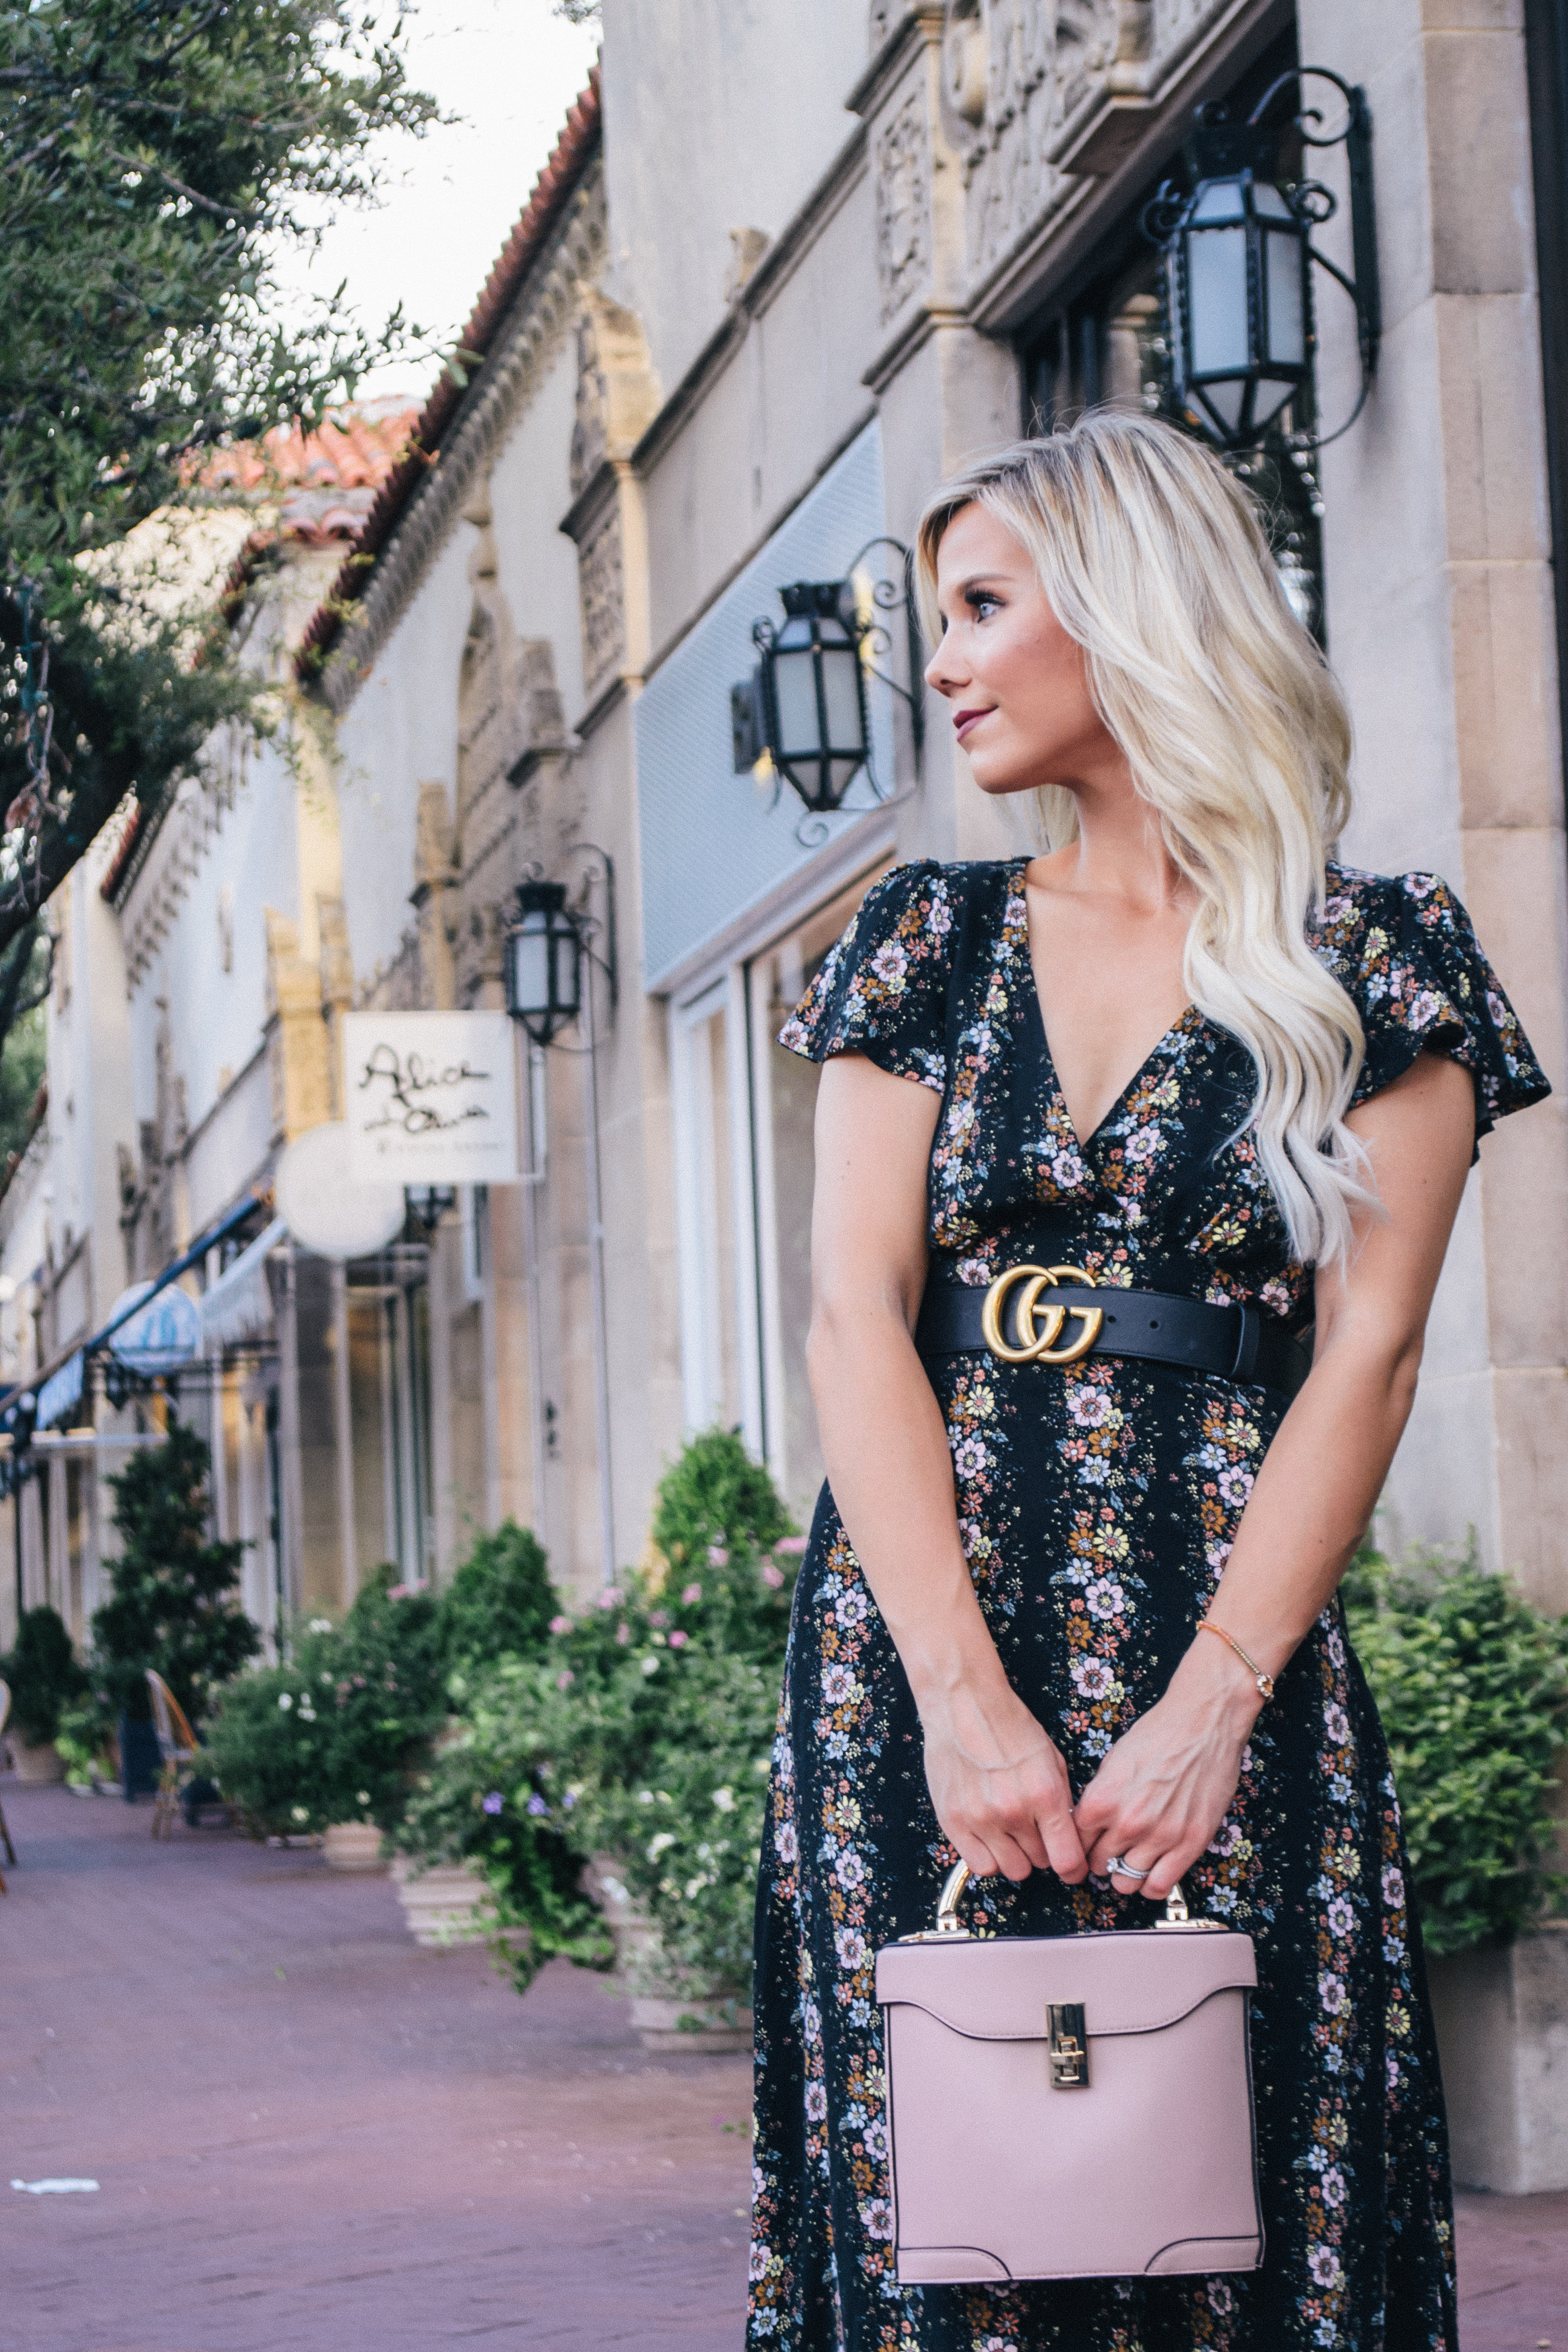 Get fall ready in this dark floral maxi dress and black and gold Gucci belt from Glam Life Living #fashion #falloutfit #fallstyle